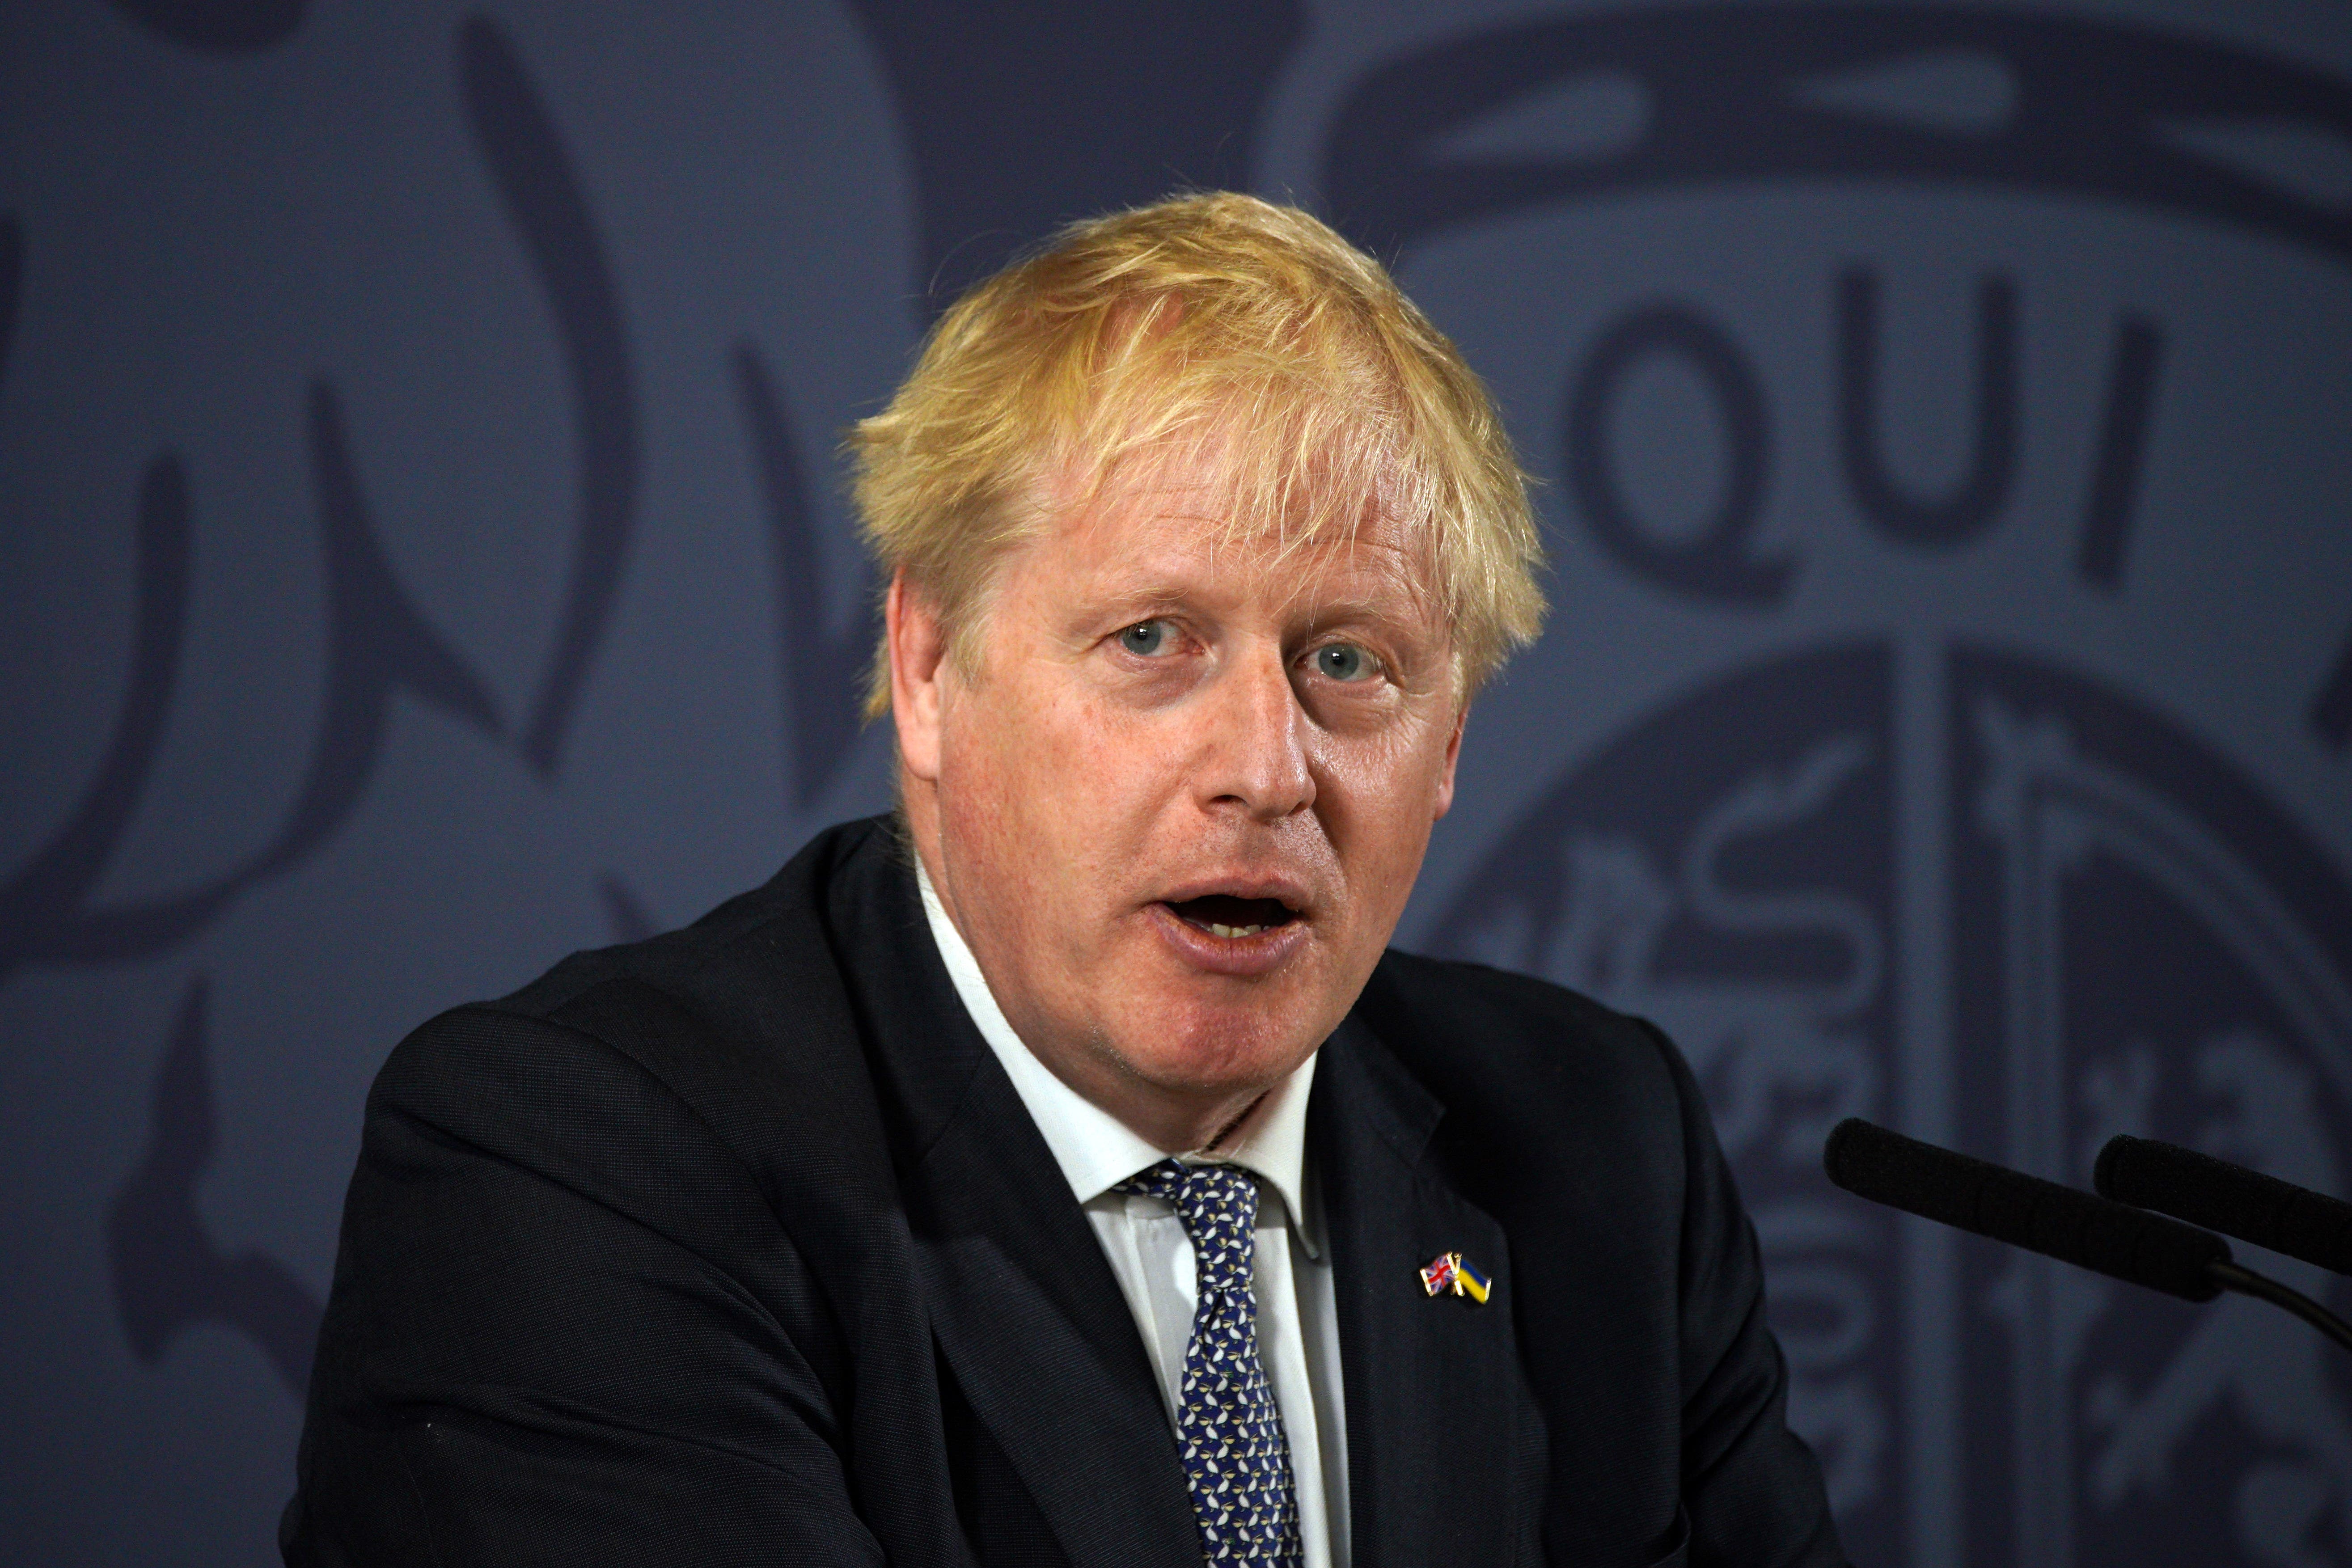 Boris Johnson has urged the Government to accelerate levelling-up measures such as planning reform and devolution in order to unleash the UK’s “massive potential” (PA)